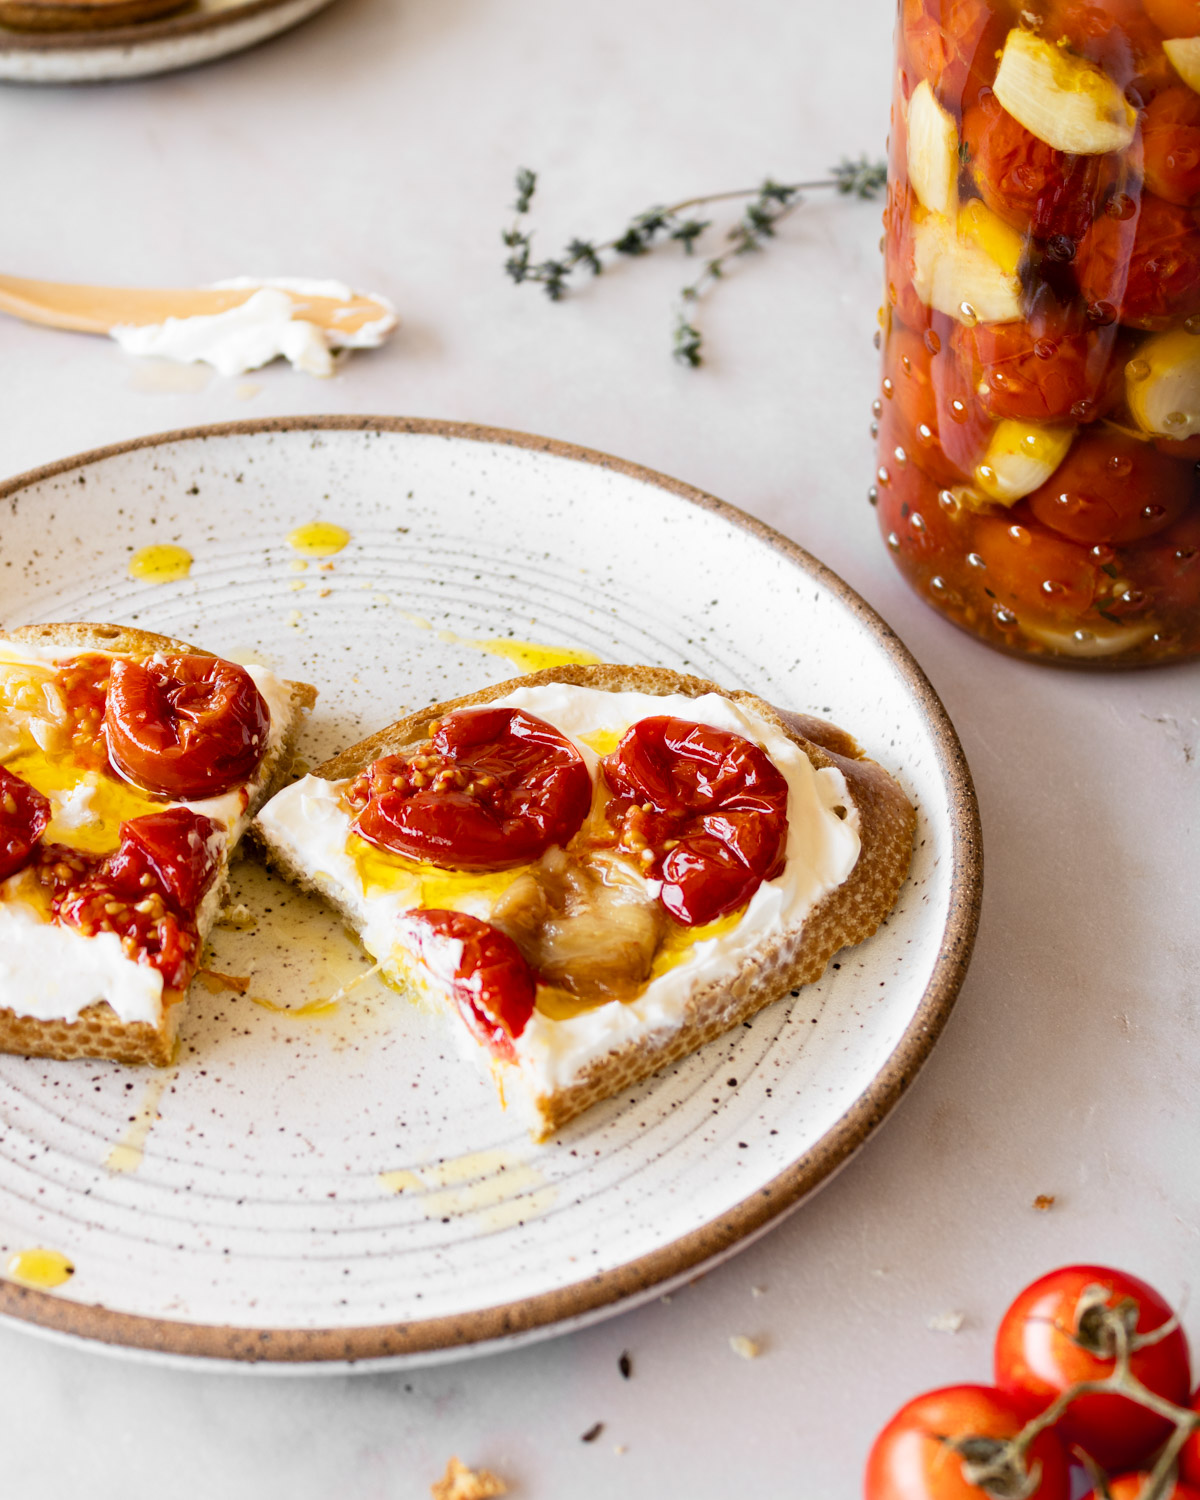 cherry tomato confit and garlic confit on toast with labneh on a ceramic plate with a jar in the background.